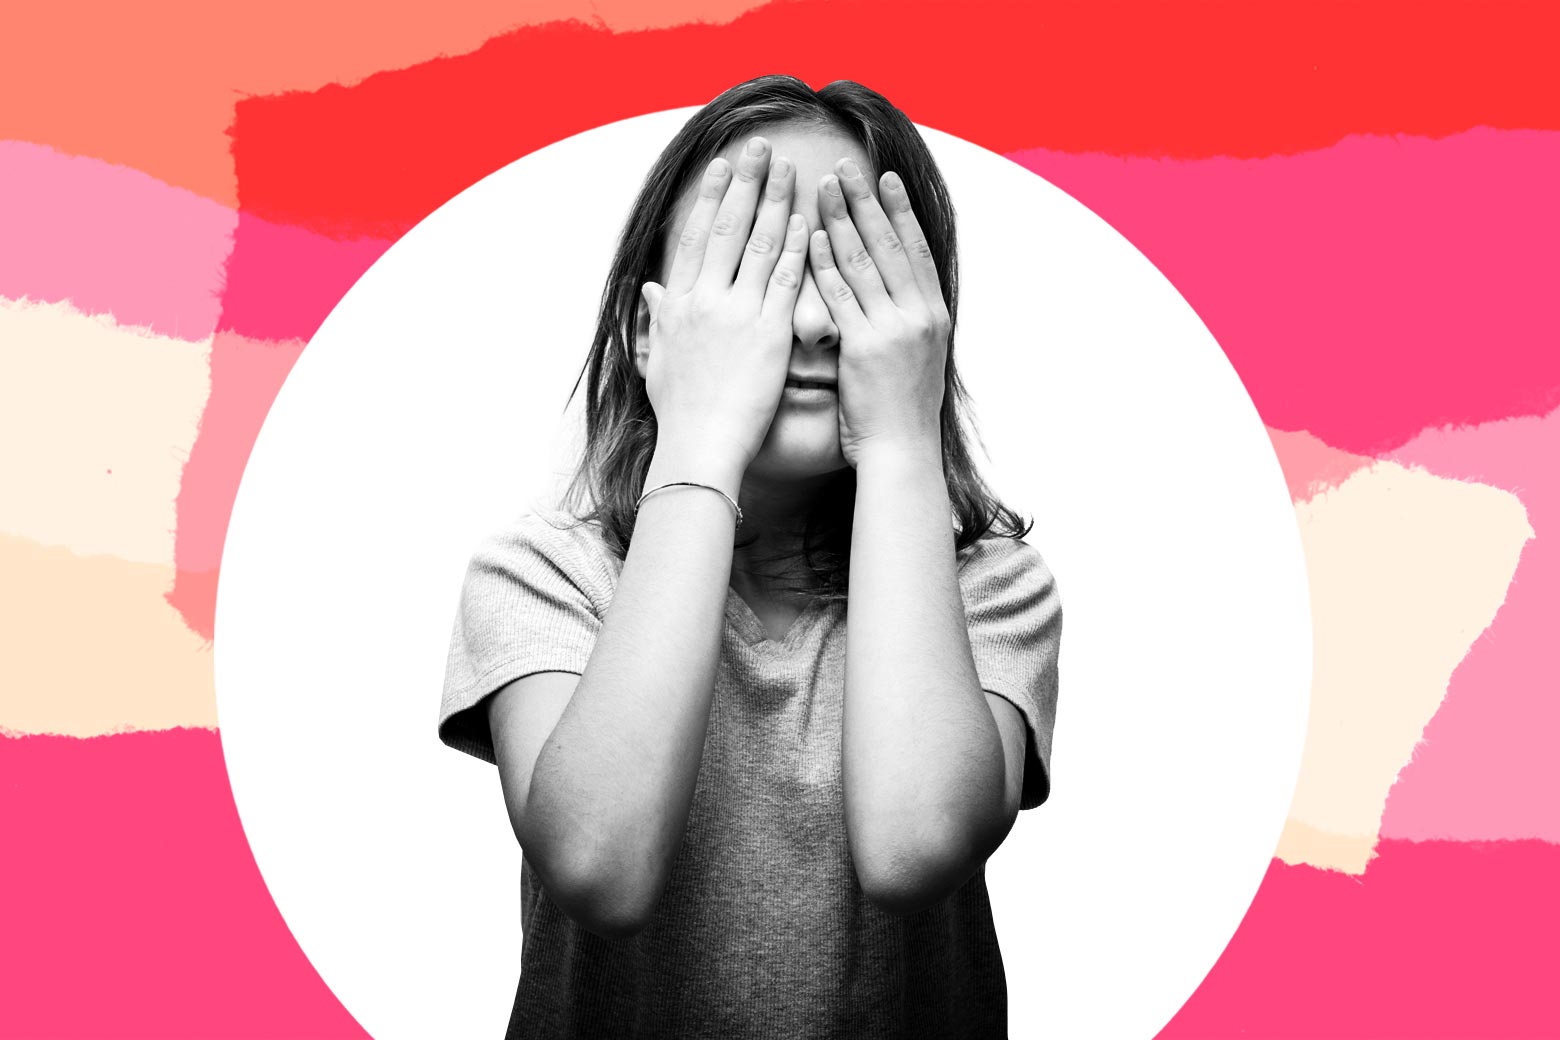 Photo illustration of a shy girl covering her face in front of abstract colorful  torn paper.